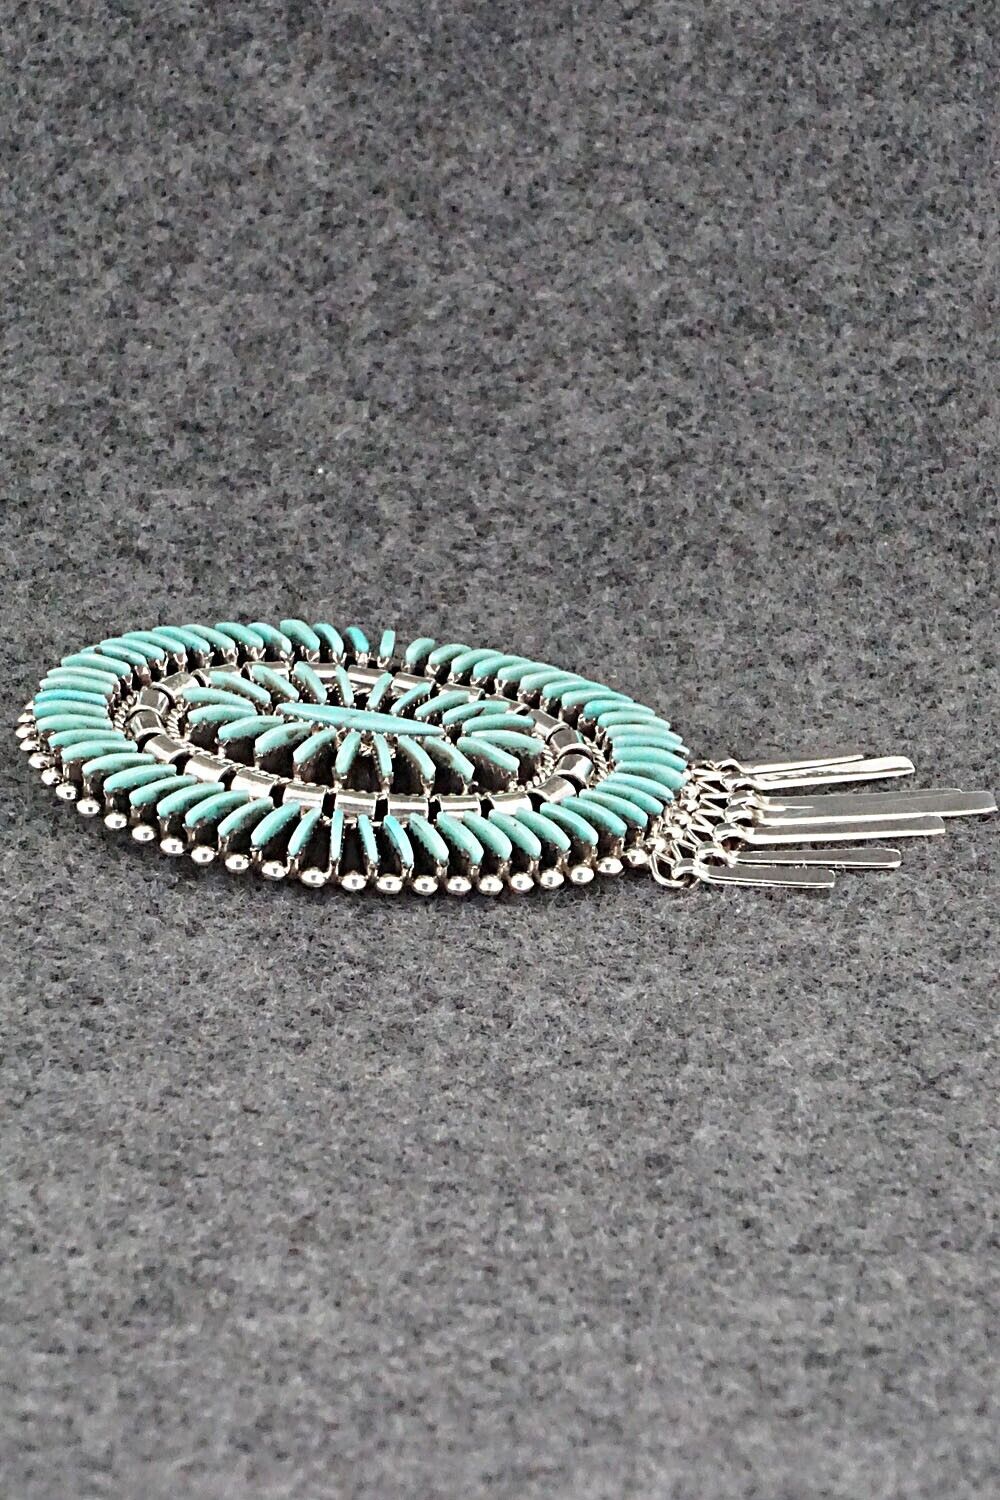 Turquoise & Sterling Silver Pendant/Pin - Edmund Cooeyate